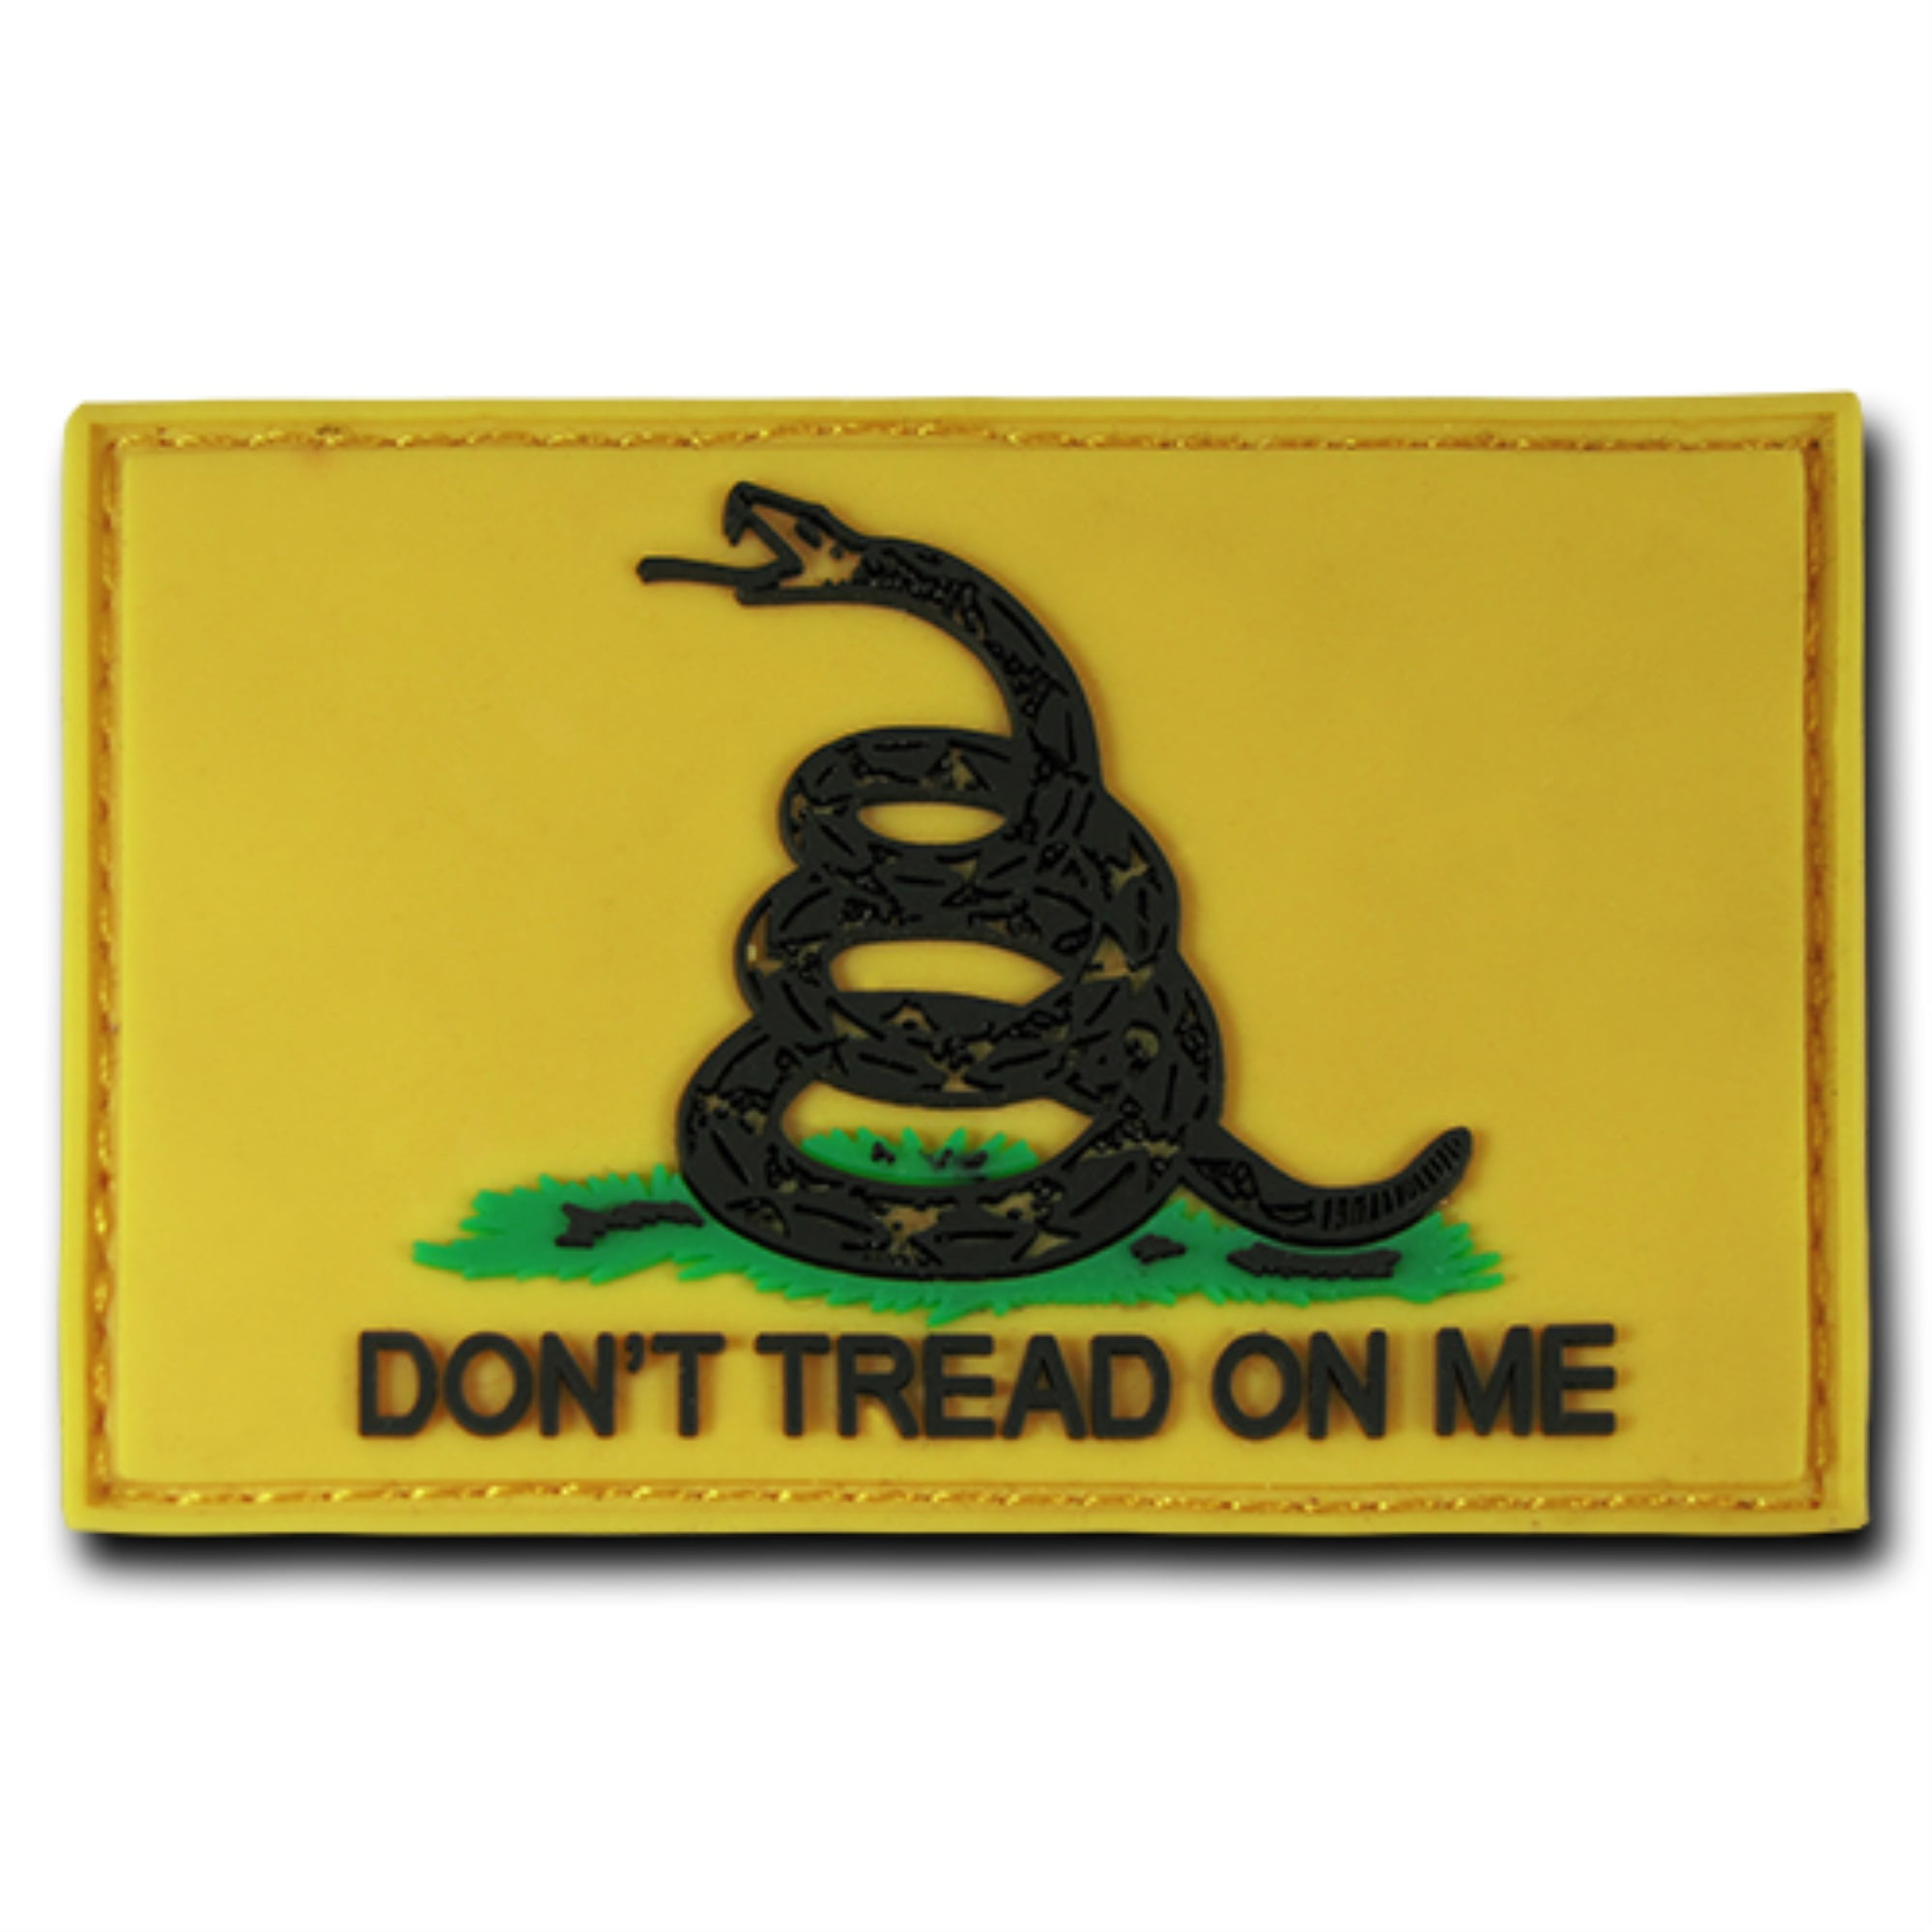 Don't Tread on Me patch